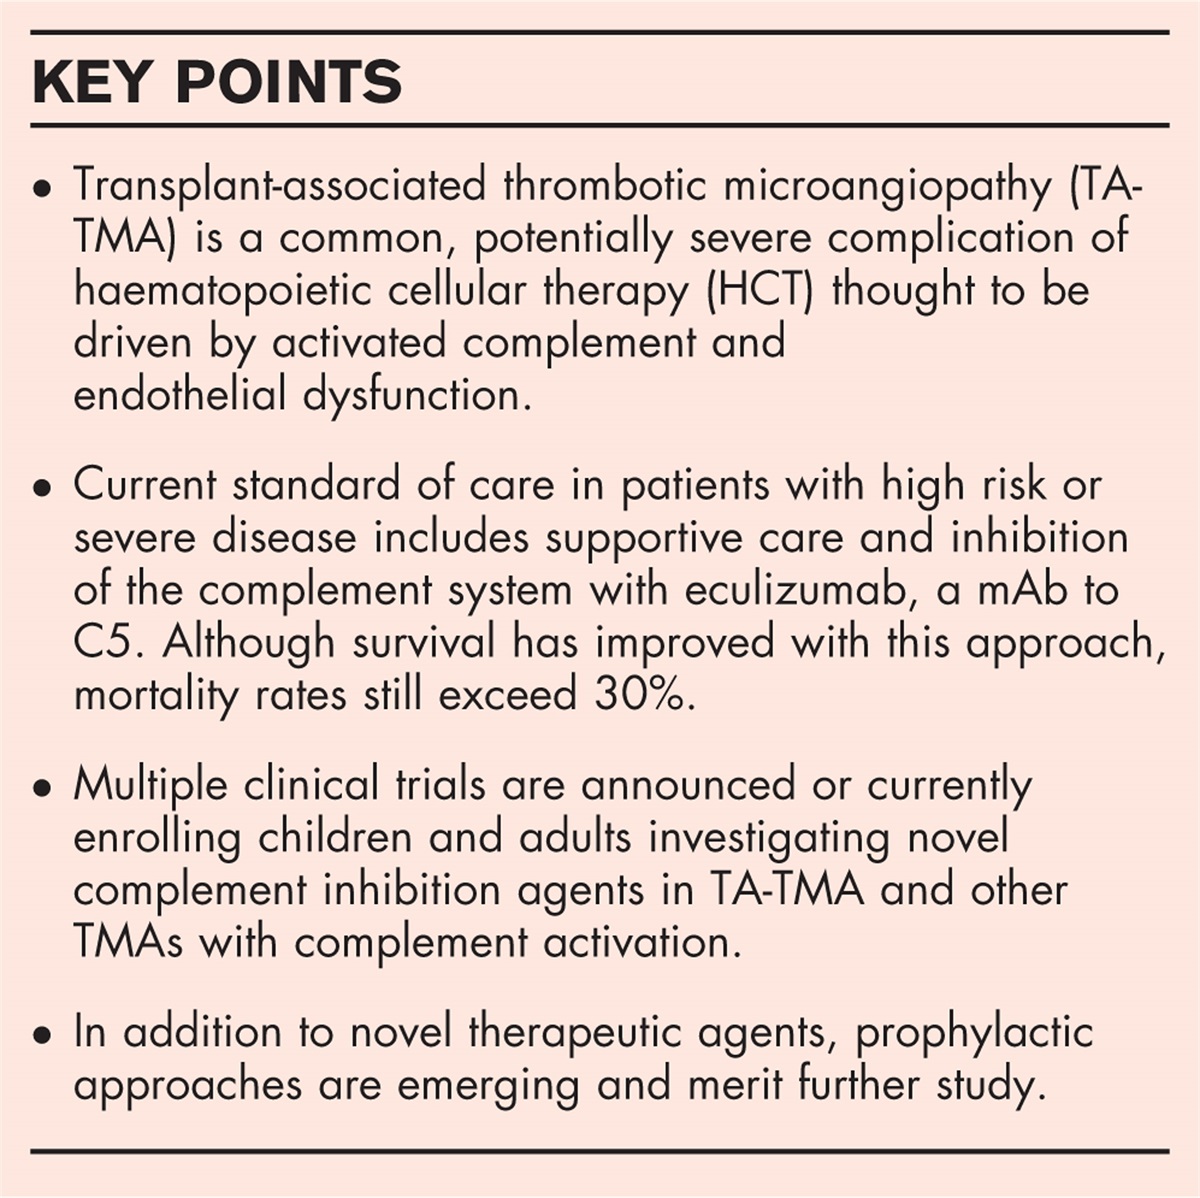 Emerging therapeutic and preventive approaches to transplant-associated thrombotic microangiopathy